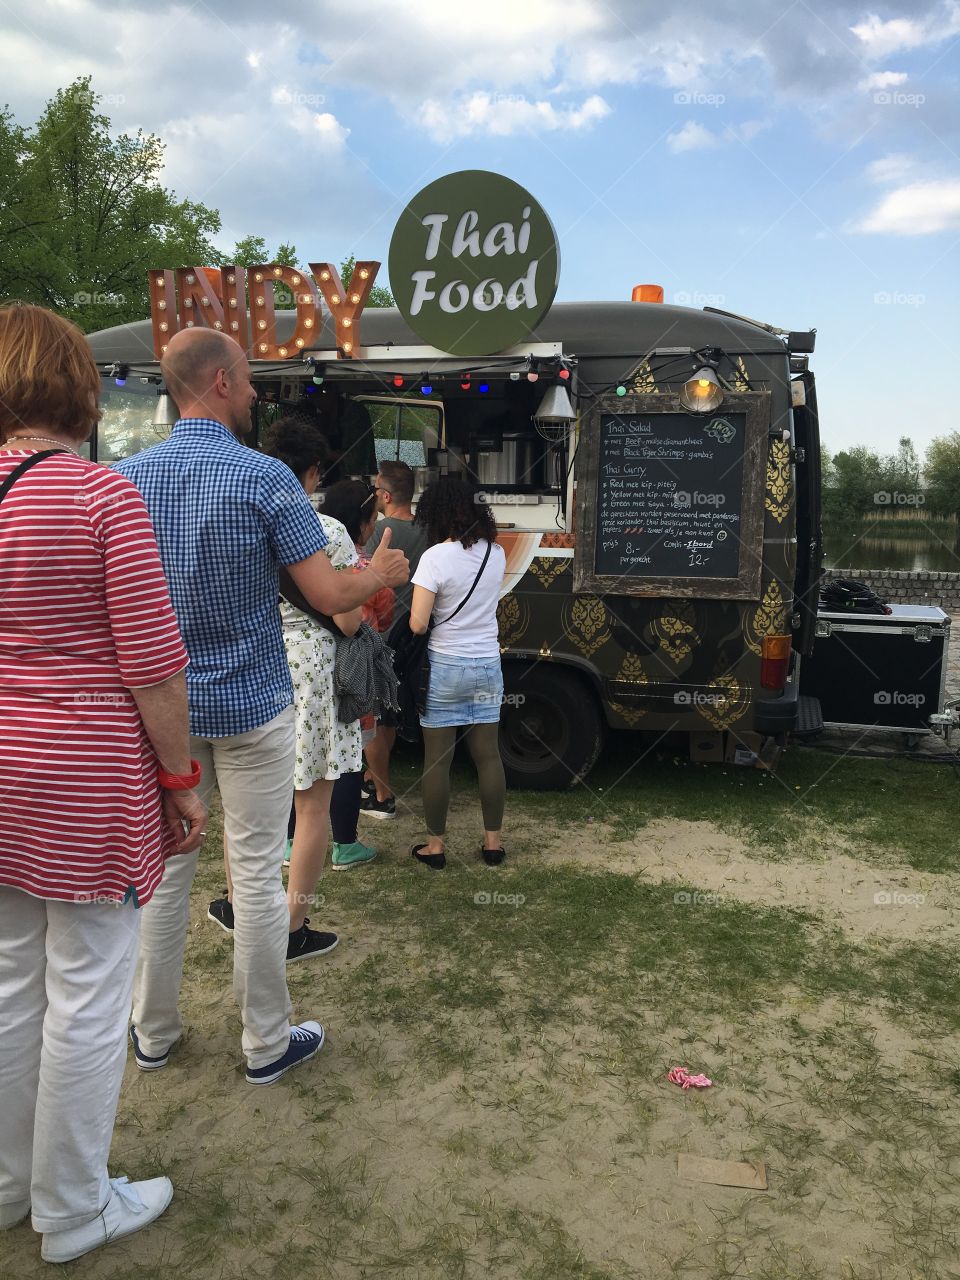 Food truck at a food-truck festival